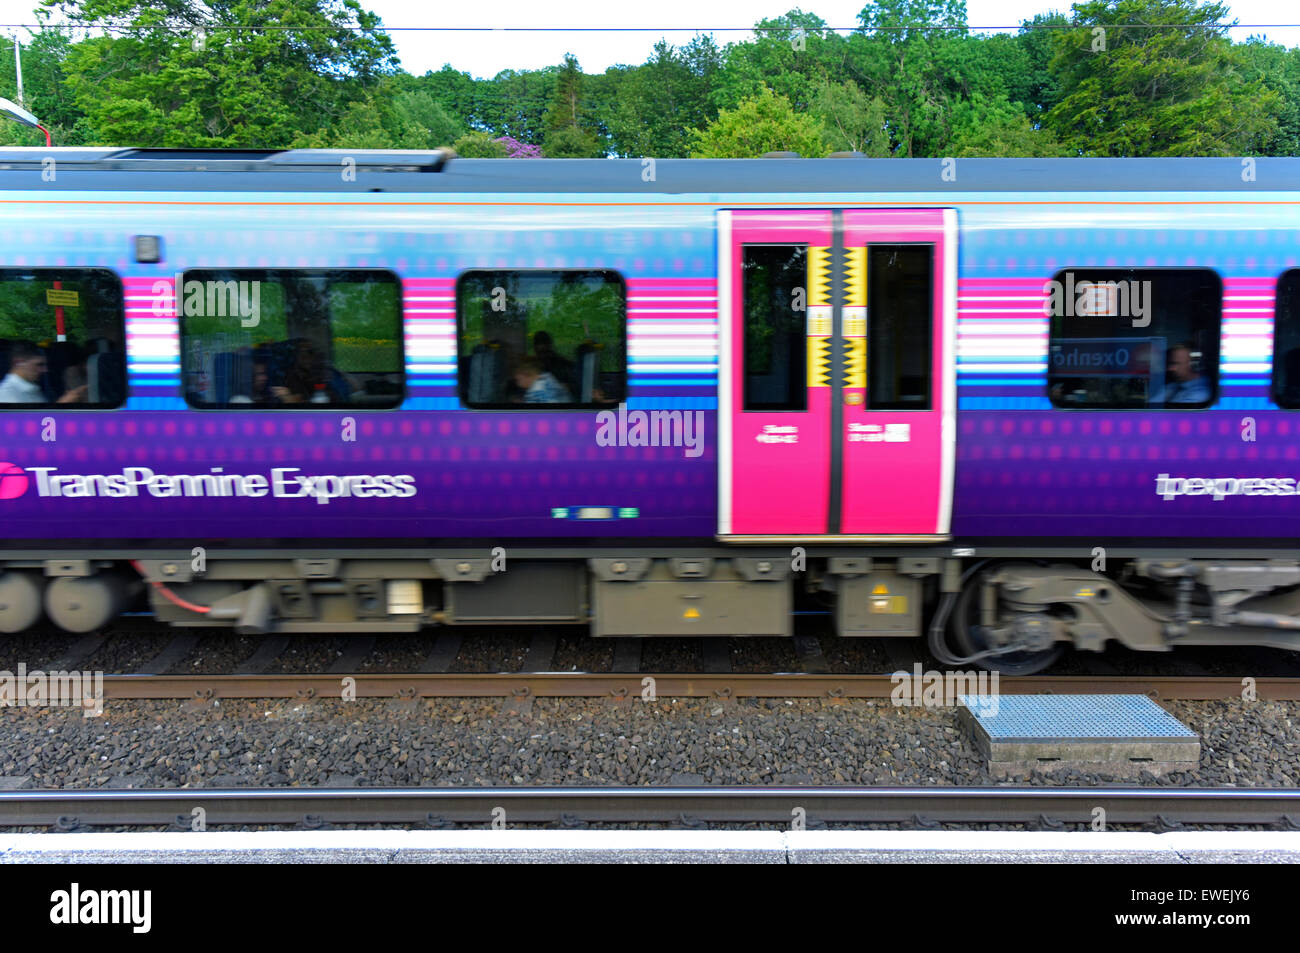 First Transpennine Express train at speed. Oxenholme Rail Station, Cumbria, England, United Kingdom, Europe. Stock Photo